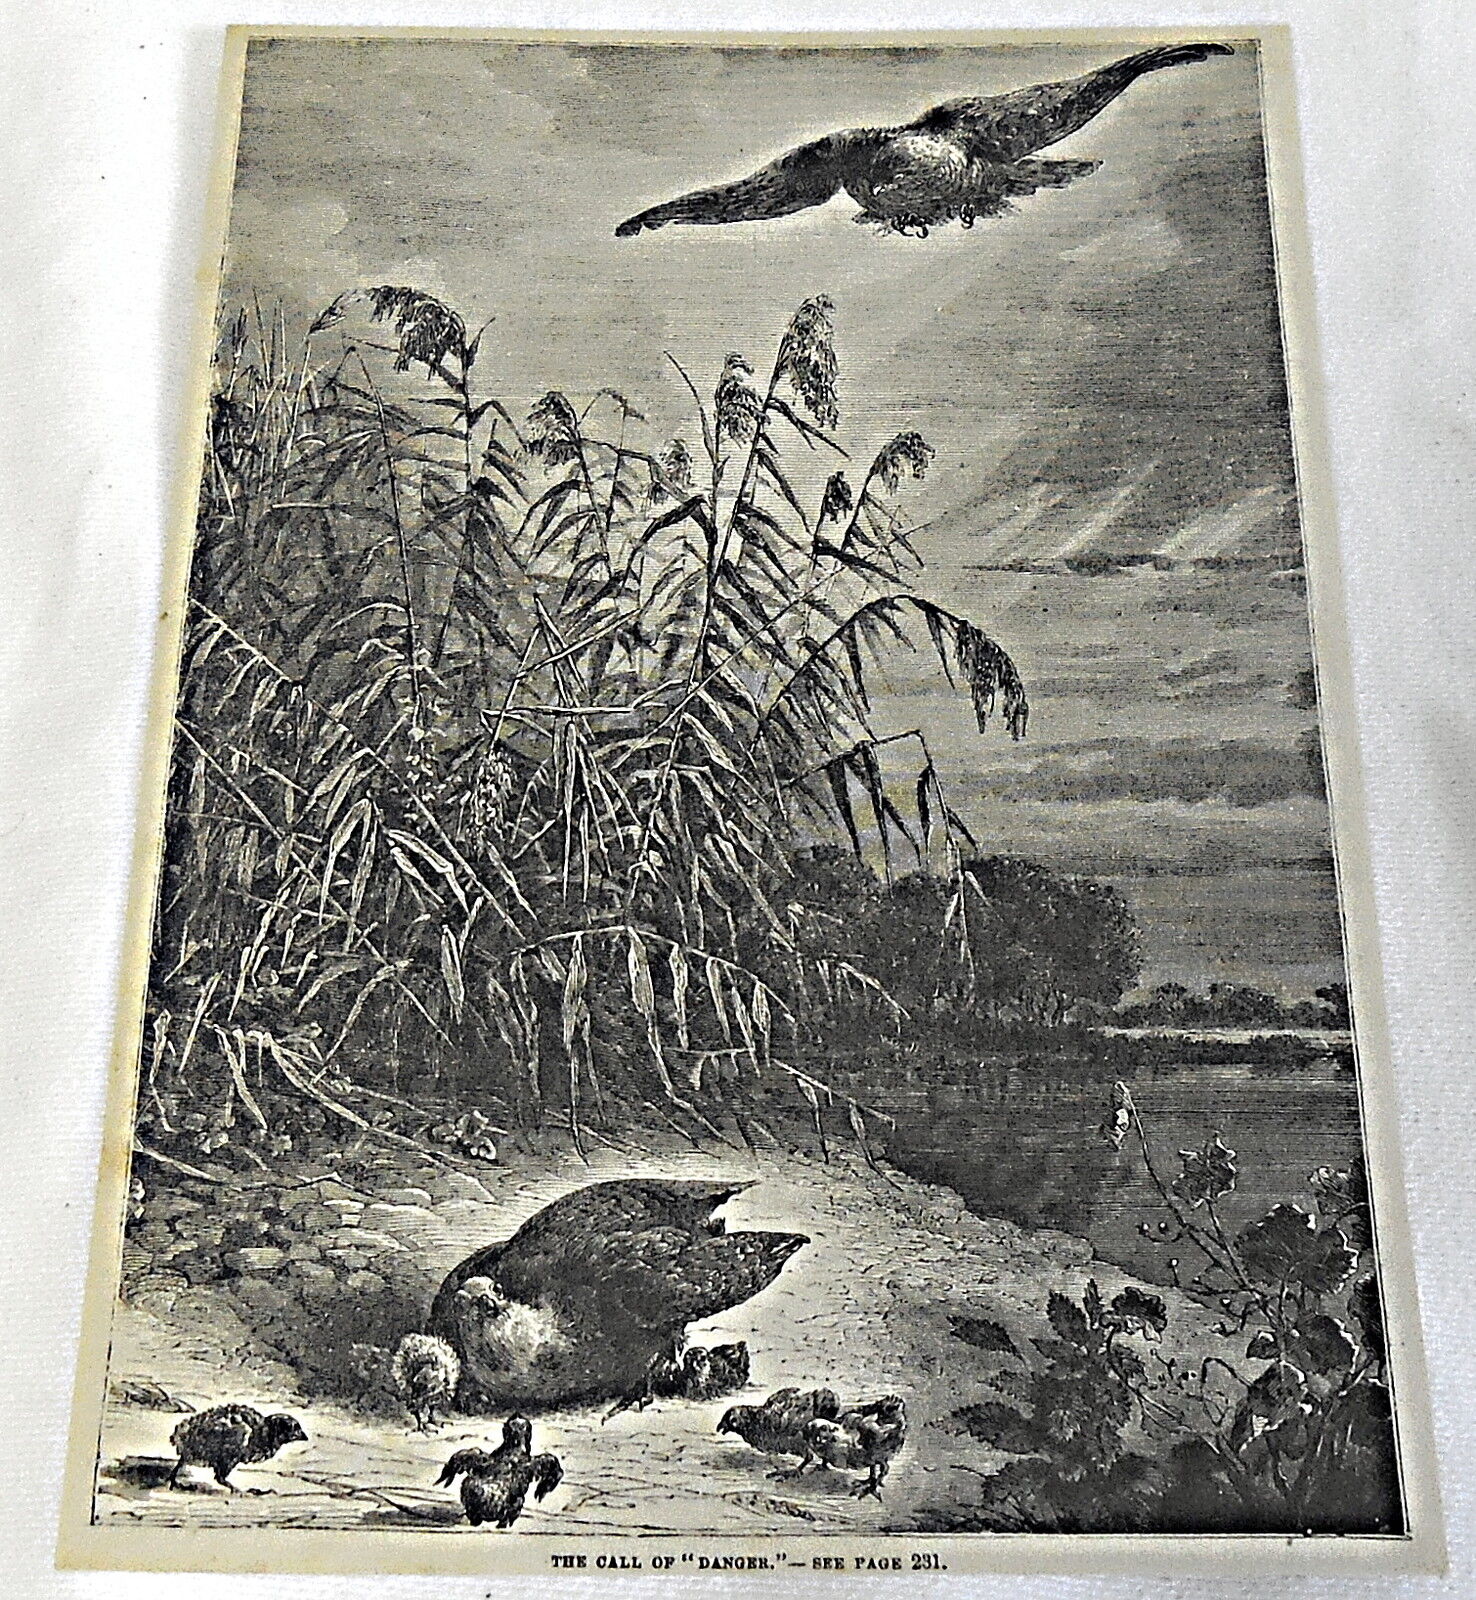 1882 Magazine Engraving ~ The Call Of Danger ~ Hawk Swoops Down On Baby Birds